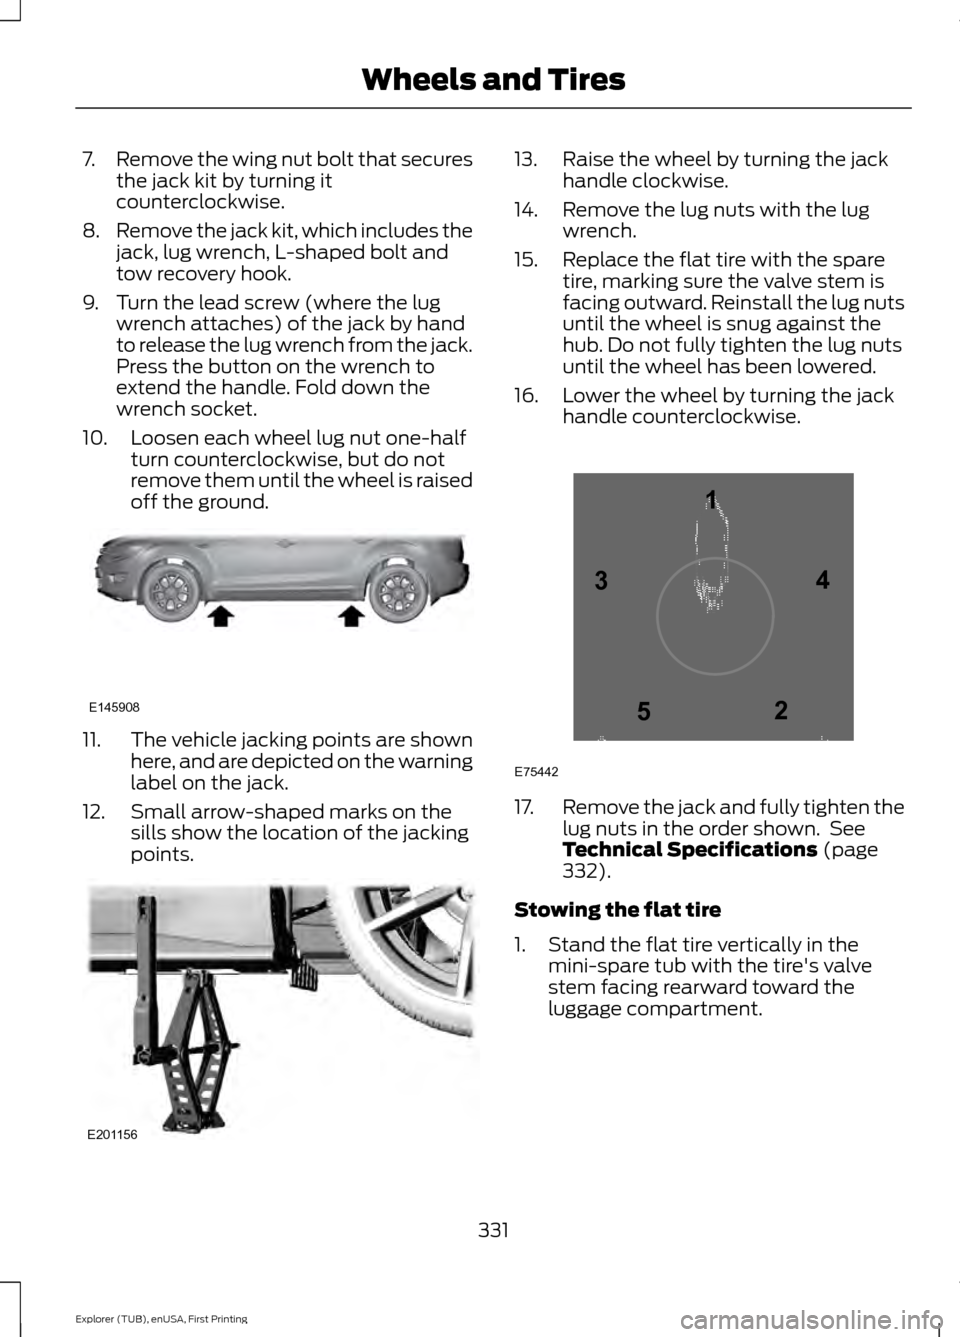 FORD EXPLORER 2016 5.G Owners Manual 7.
Remove the wing nut bolt that secures
the jack kit by turning it
counterclockwise.
8. Remove the jack kit, which includes the
jack, lug wrench, L-shaped bolt and
tow recovery hook.
9. Turn the lead